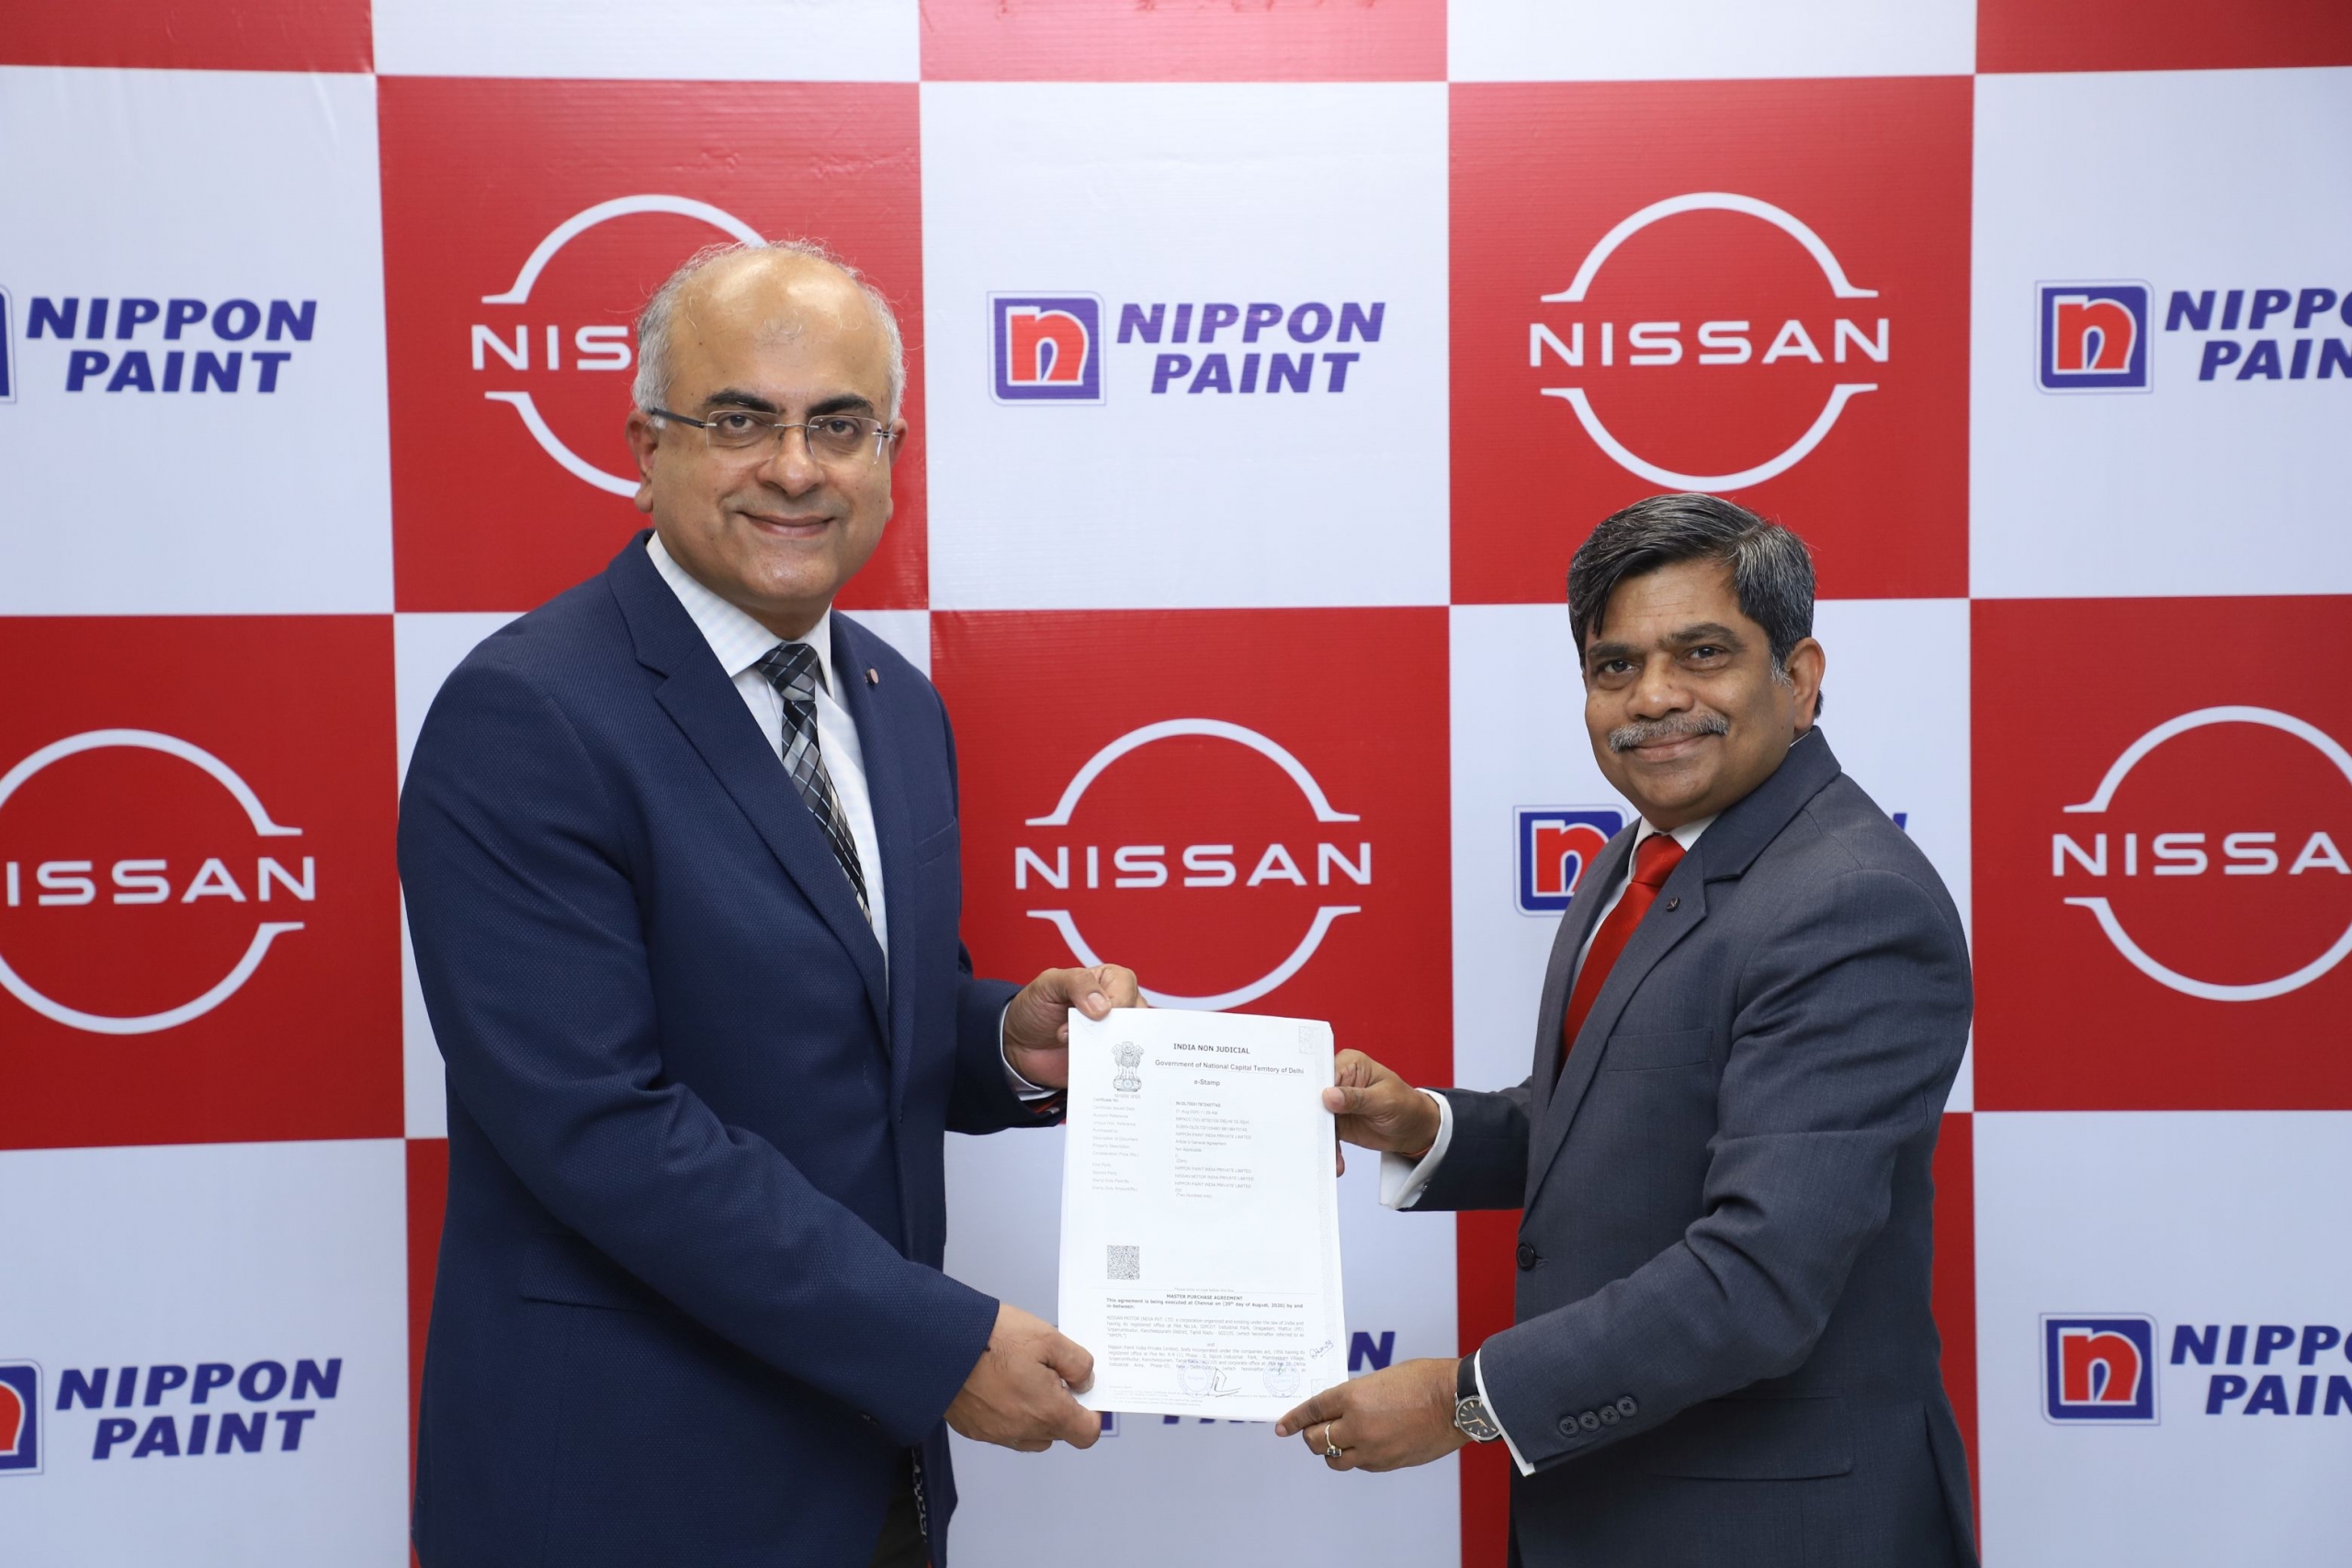 Nippon Paint & Nissan Motor India collaborate Exclusively for Paint Supplies under Unique Drop Shipment Process